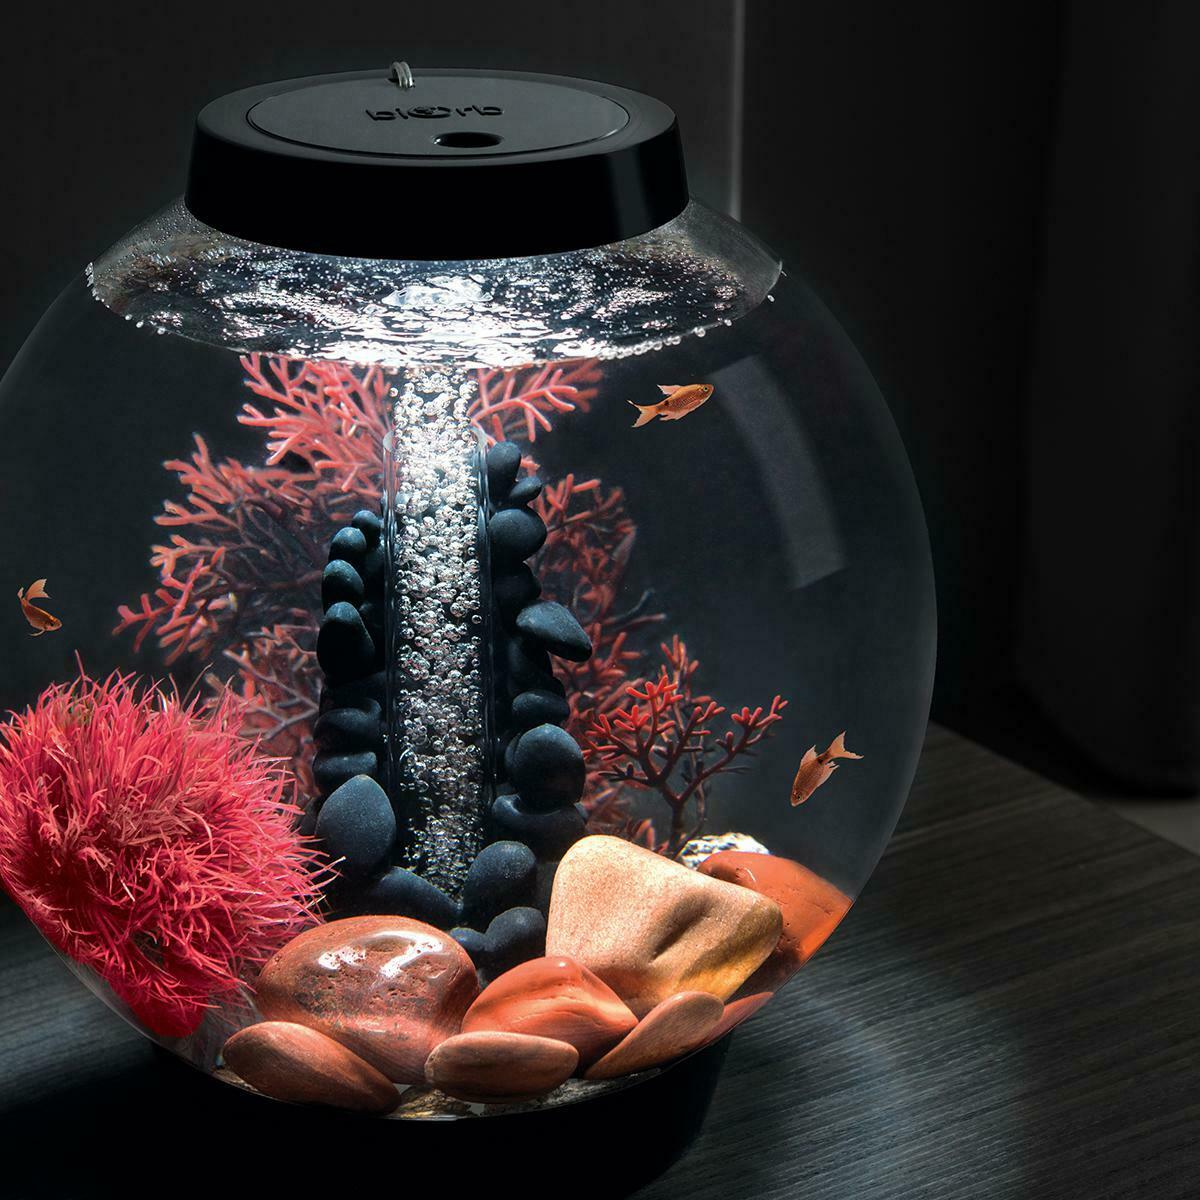 Biorb Classic Aquarium With All Decor And Accessories Included - White Led Light-decoration peice-AULEY